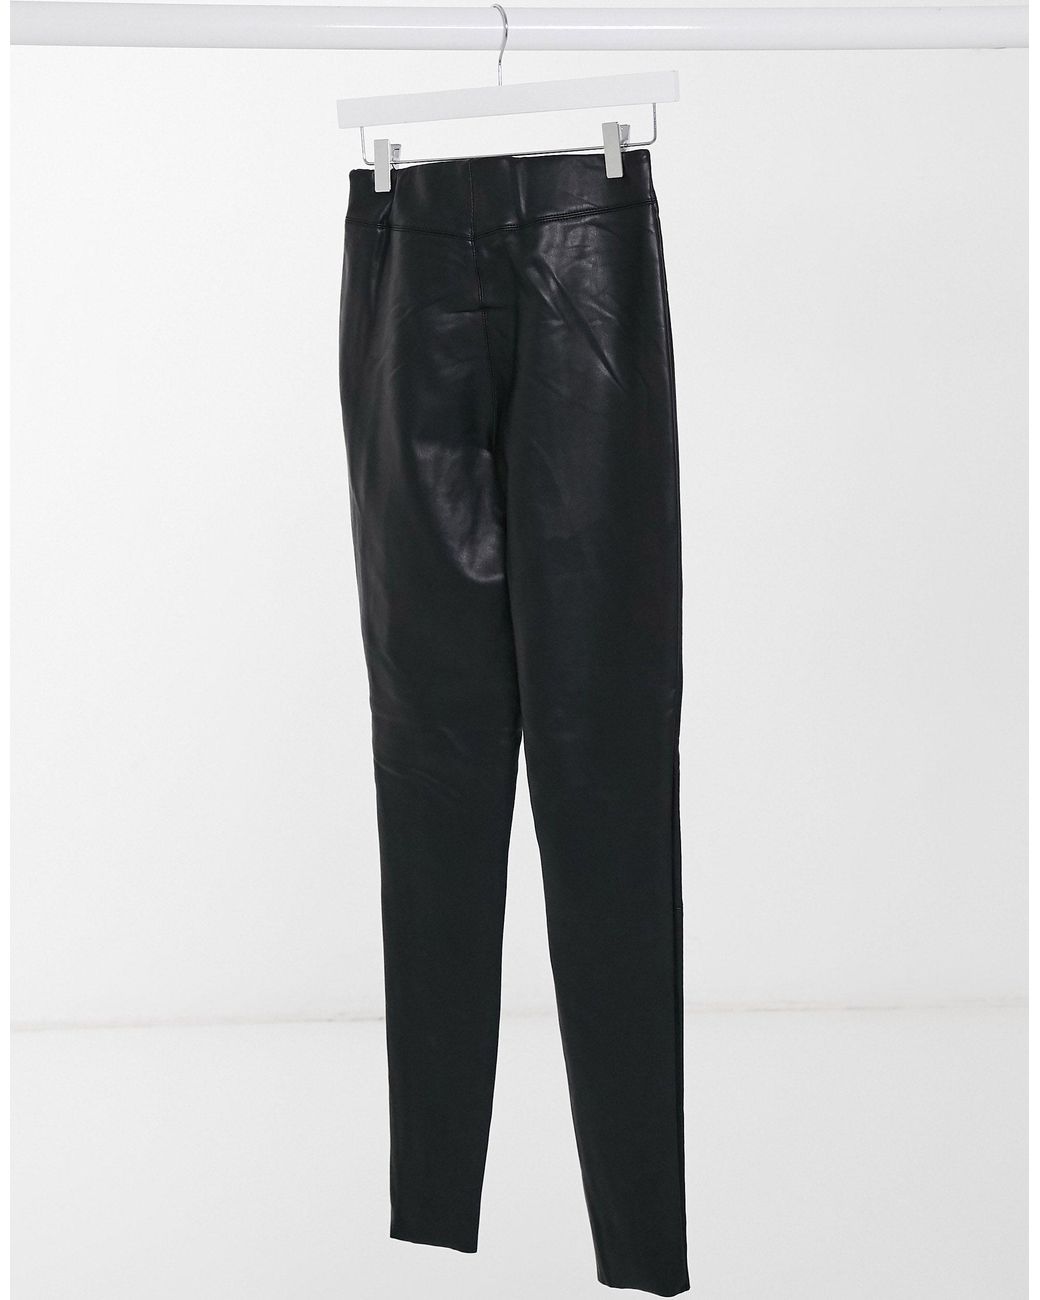 Topshop Tall faux leather skinny fit biker trouser in black